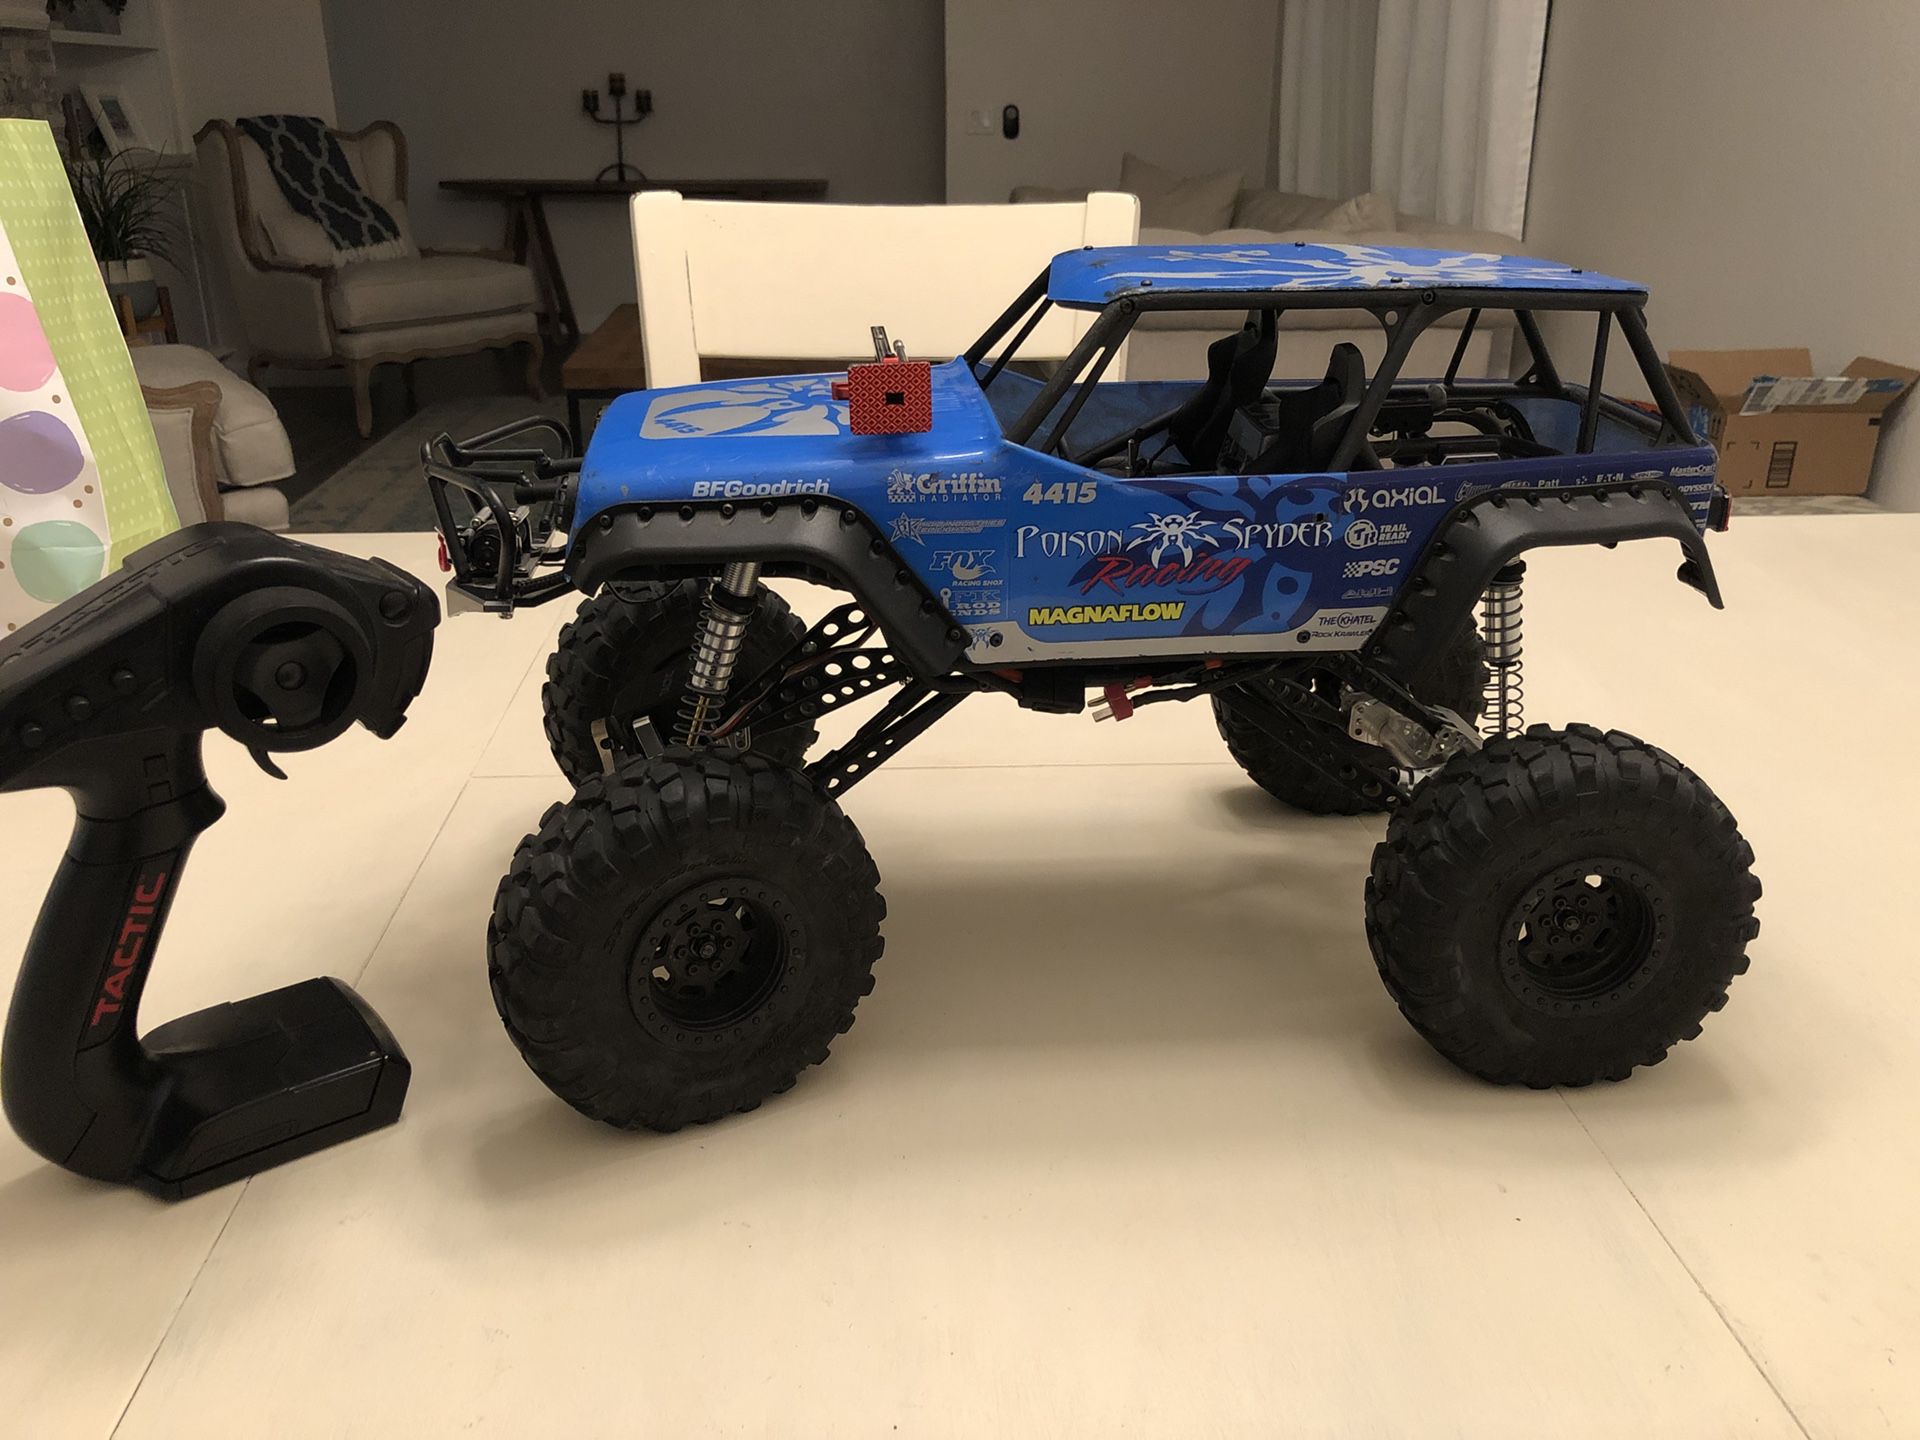 Axial Wraith poison spyder. for Sale in Scottsdale, AZ - OfferUp